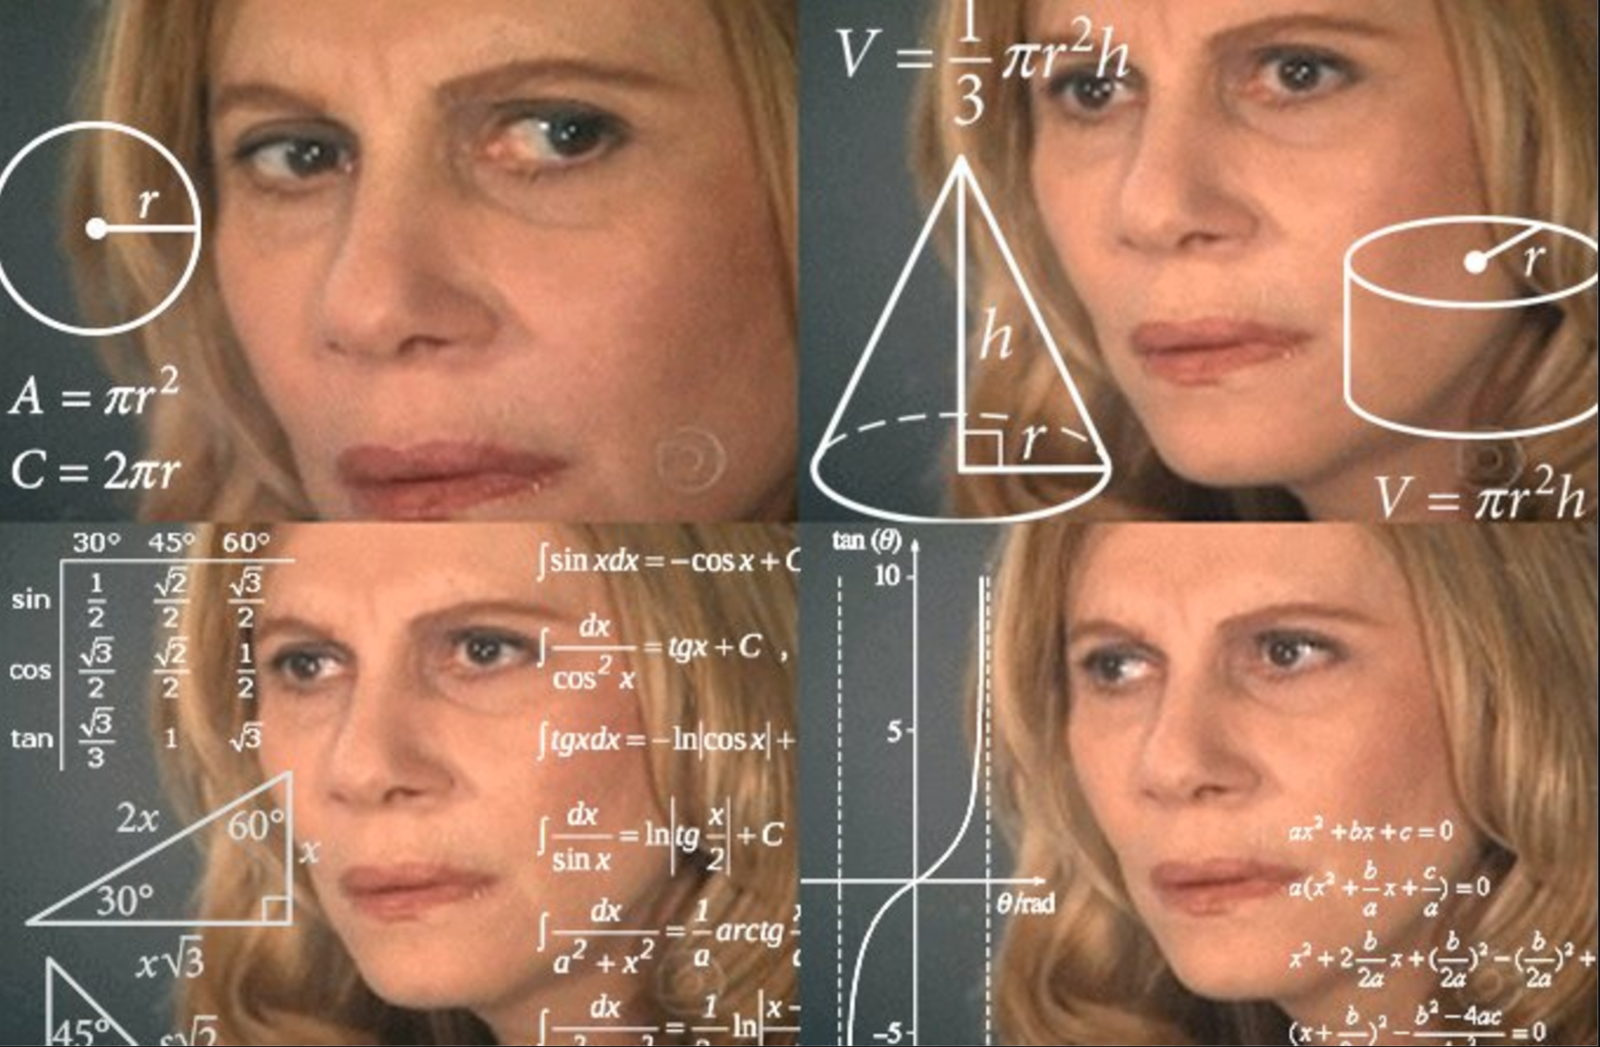 Four images of woman looking very confused with math equations superimposed on the images